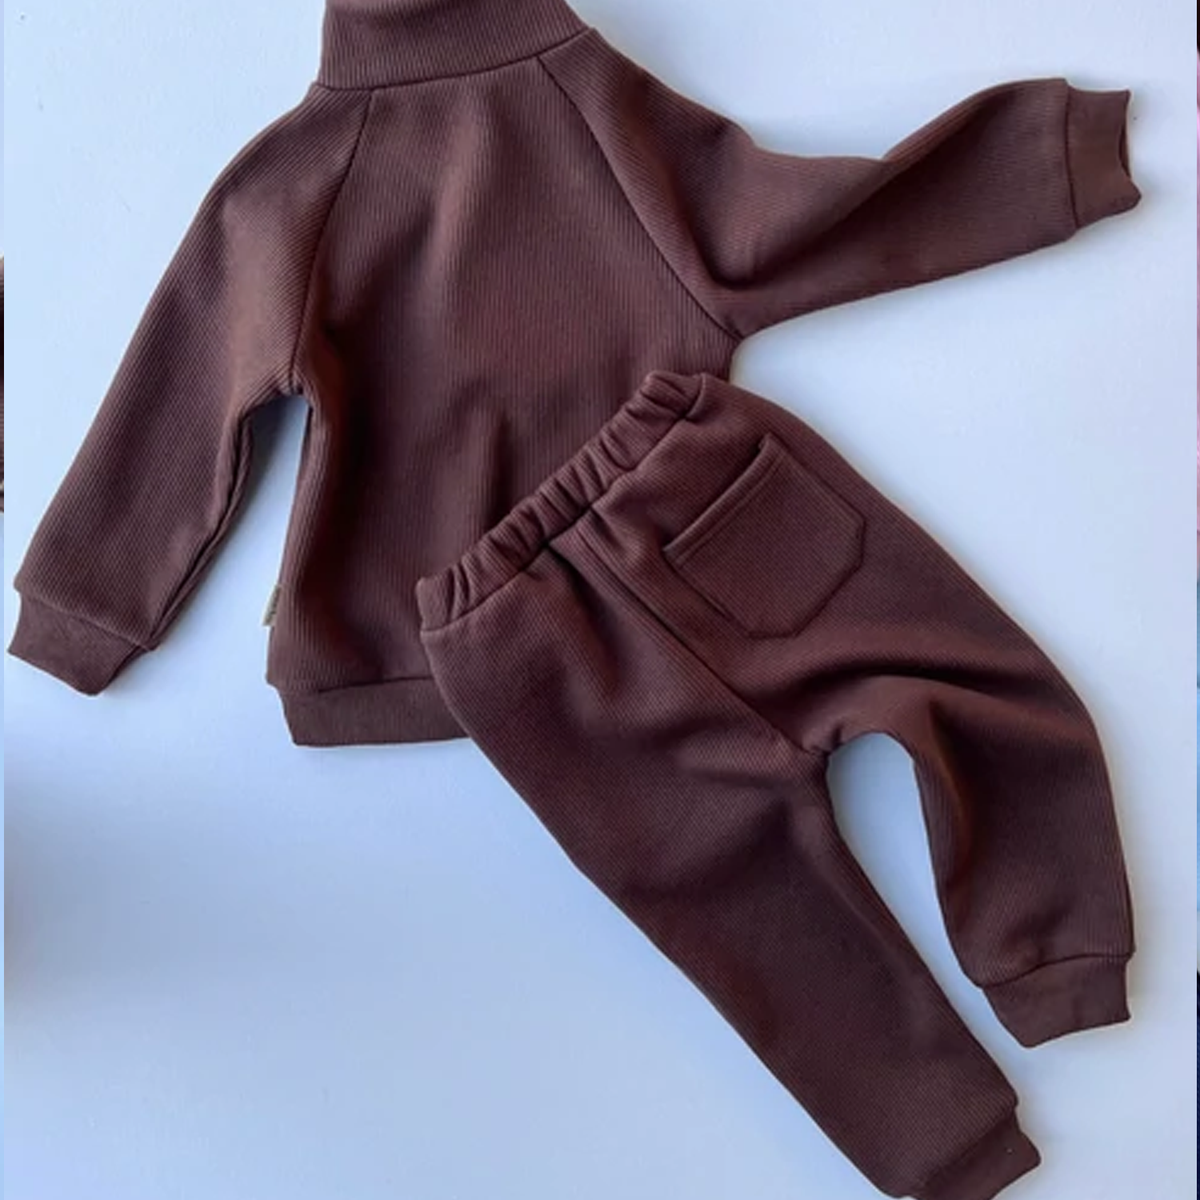 Embroidered Fleece Lined Walnut Ribbed Tracksuit